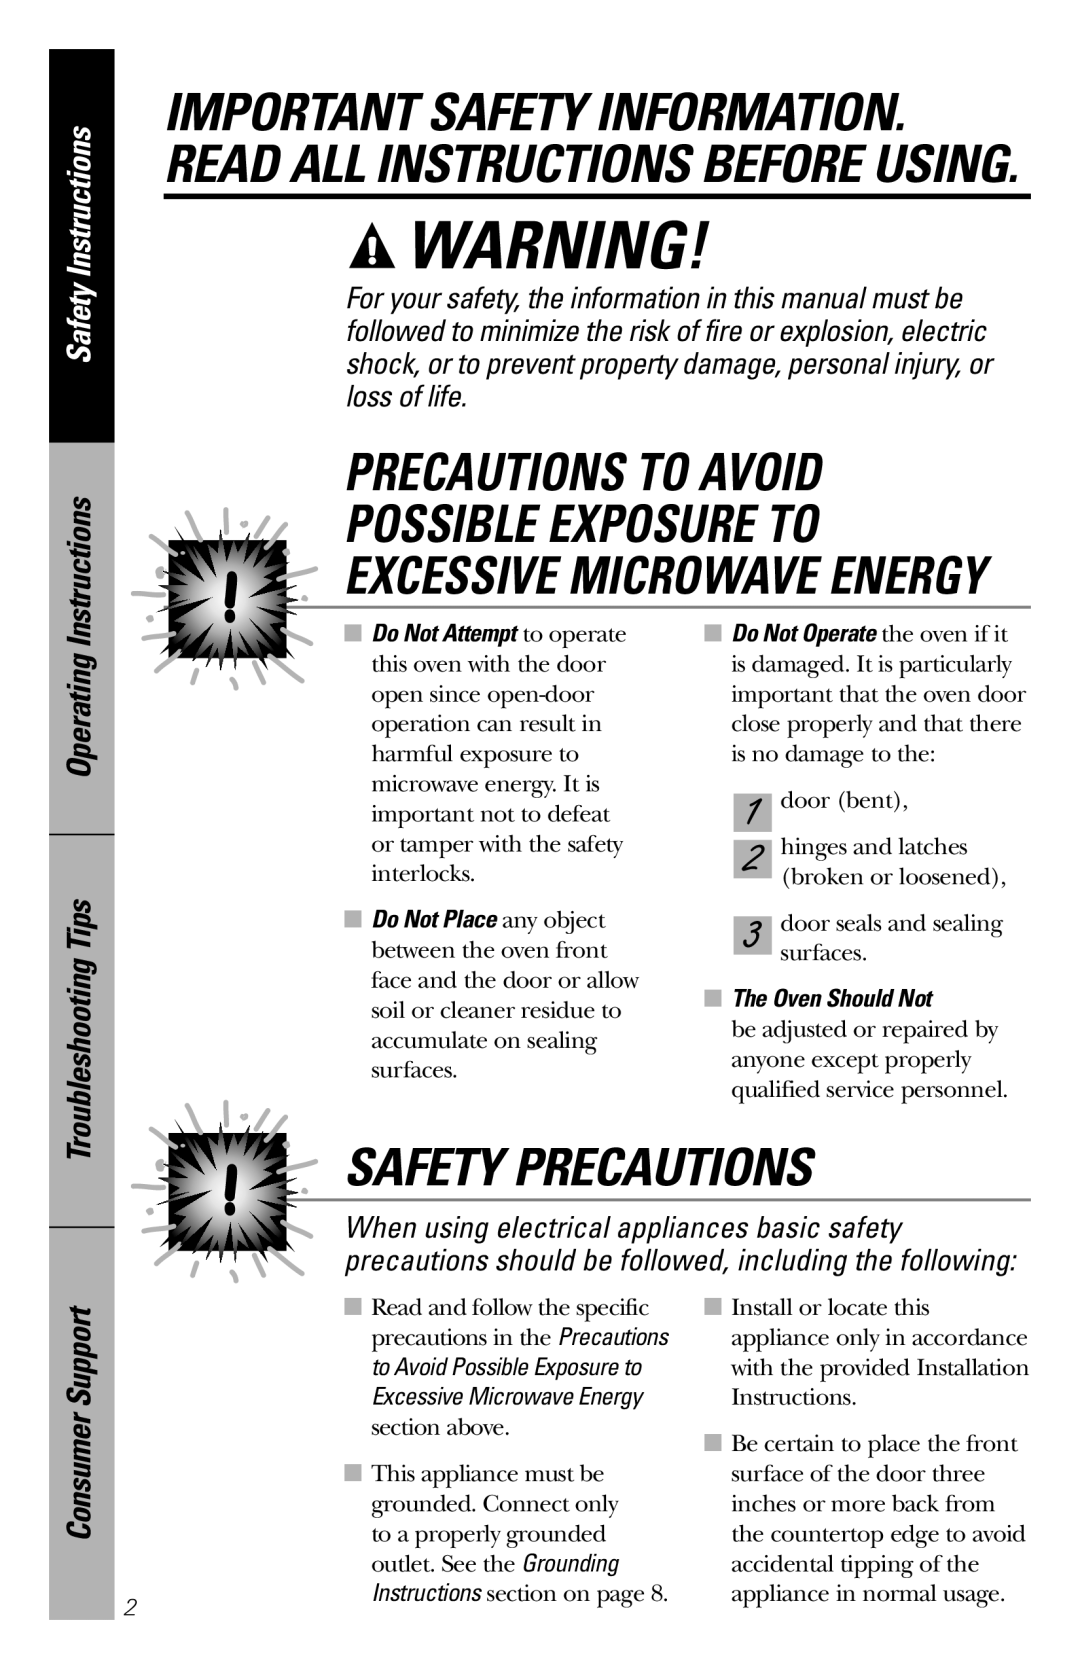 GE JES1456 Precautions To Avoid Possible Exposure To, Safety Precautions, Excessive Microwave Energy, Safety Instructions 